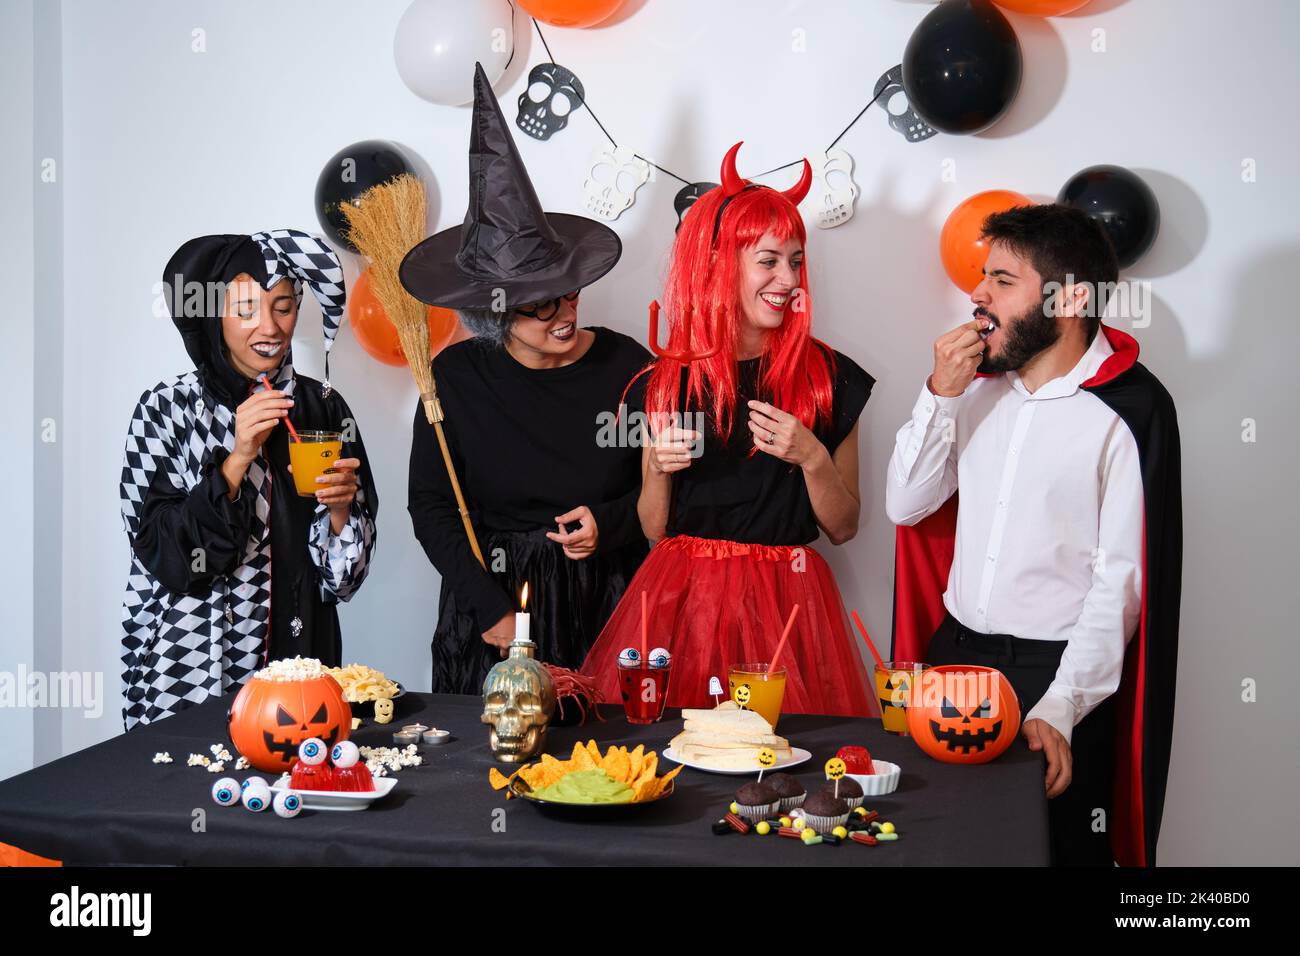 Four people talking and laughing at a costume Halloween party. Stock Photo